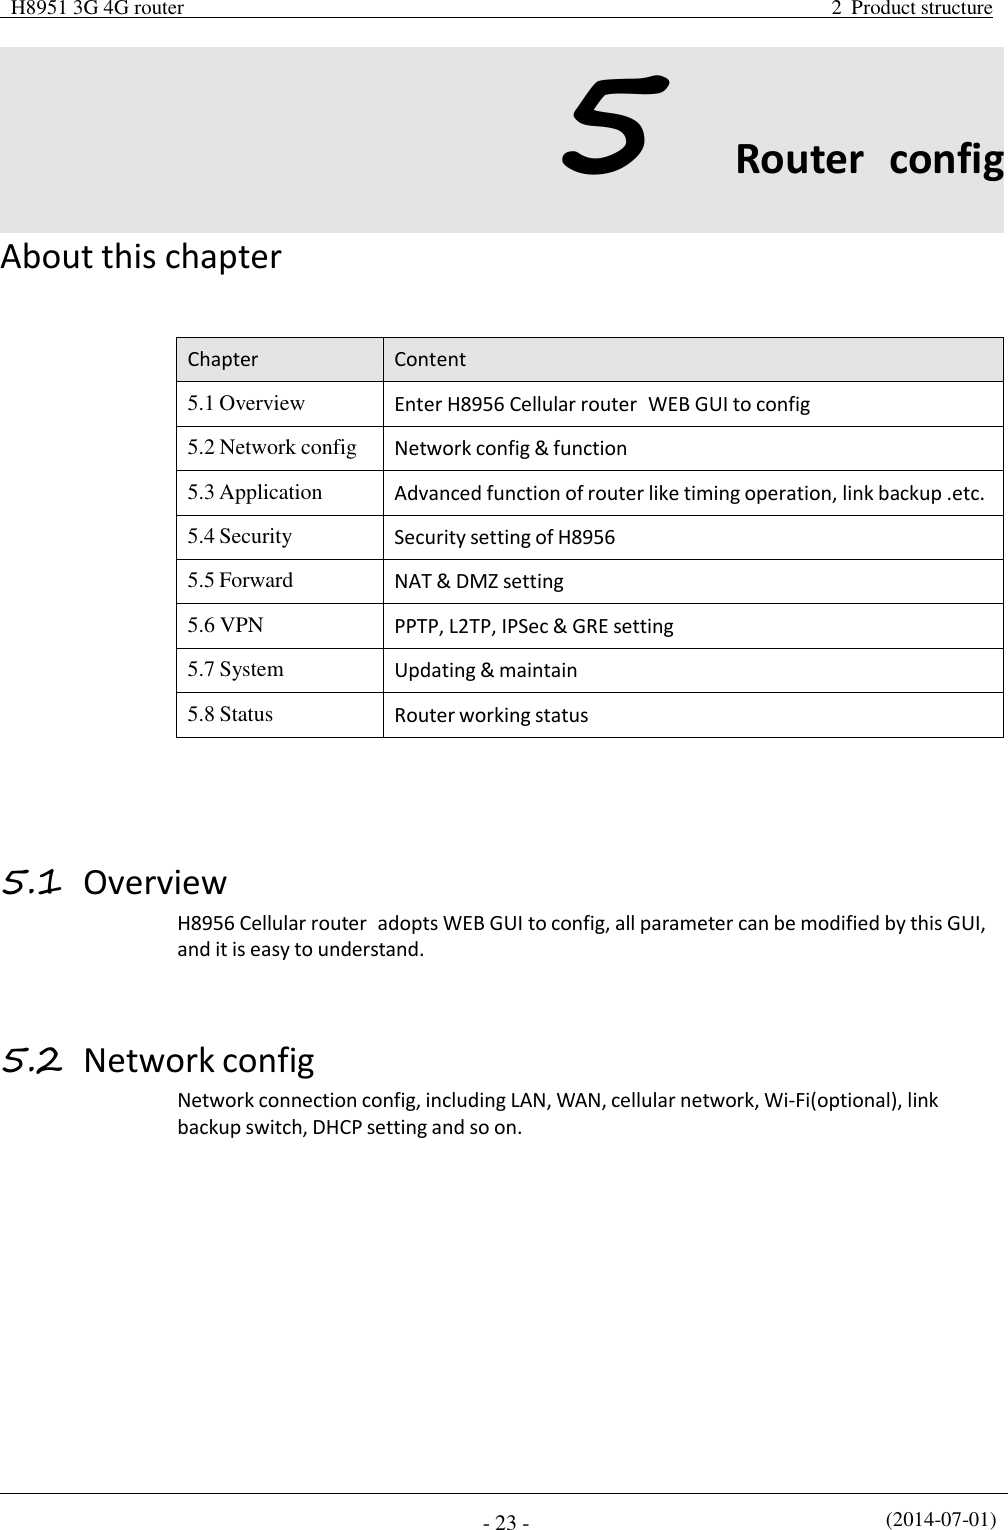  H8951 3G 4G router  2  Product structure (2014-07-01) - 23 -   5 Router  config  About this chapter    Chapter Content 5.1 Overview Enter H8956 Cellular router  WEB GUI to config 5.2 Network config Network config &amp; function 5.3 Application Advanced function of router like timing operation, link backup .etc. 5.4 Security Security setting of H8956 5.5 Forward NAT &amp; DMZ setting 5.6 VPN PPTP, L2TP, IPSec &amp; GRE setting 5.7 System Updating &amp; maintain 5.8 Status Router working status      5.1 Overview H8956 Cellular router  adopts WEB GUI to config, all parameter can be modified by this GUI, and it is easy to understand.    5.2 Network config Network connection config, including LAN, WAN, cellular network, Wi-Fi(optional), link backup switch, DHCP setting and so on. 